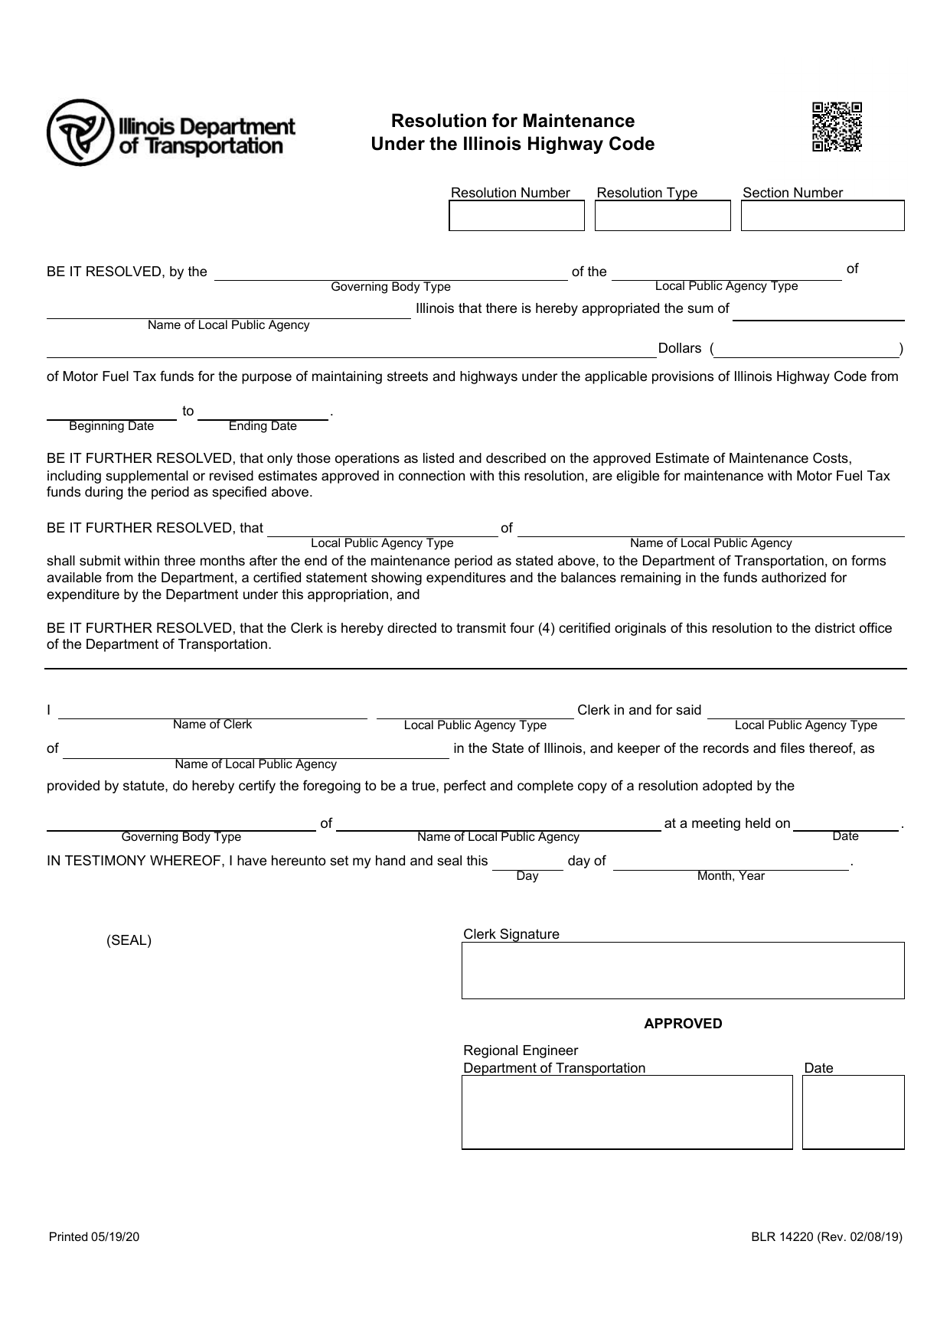 Form BLR14220 Resolution for Maintenance Under the Illinois Highway Code - Illinois, Page 1